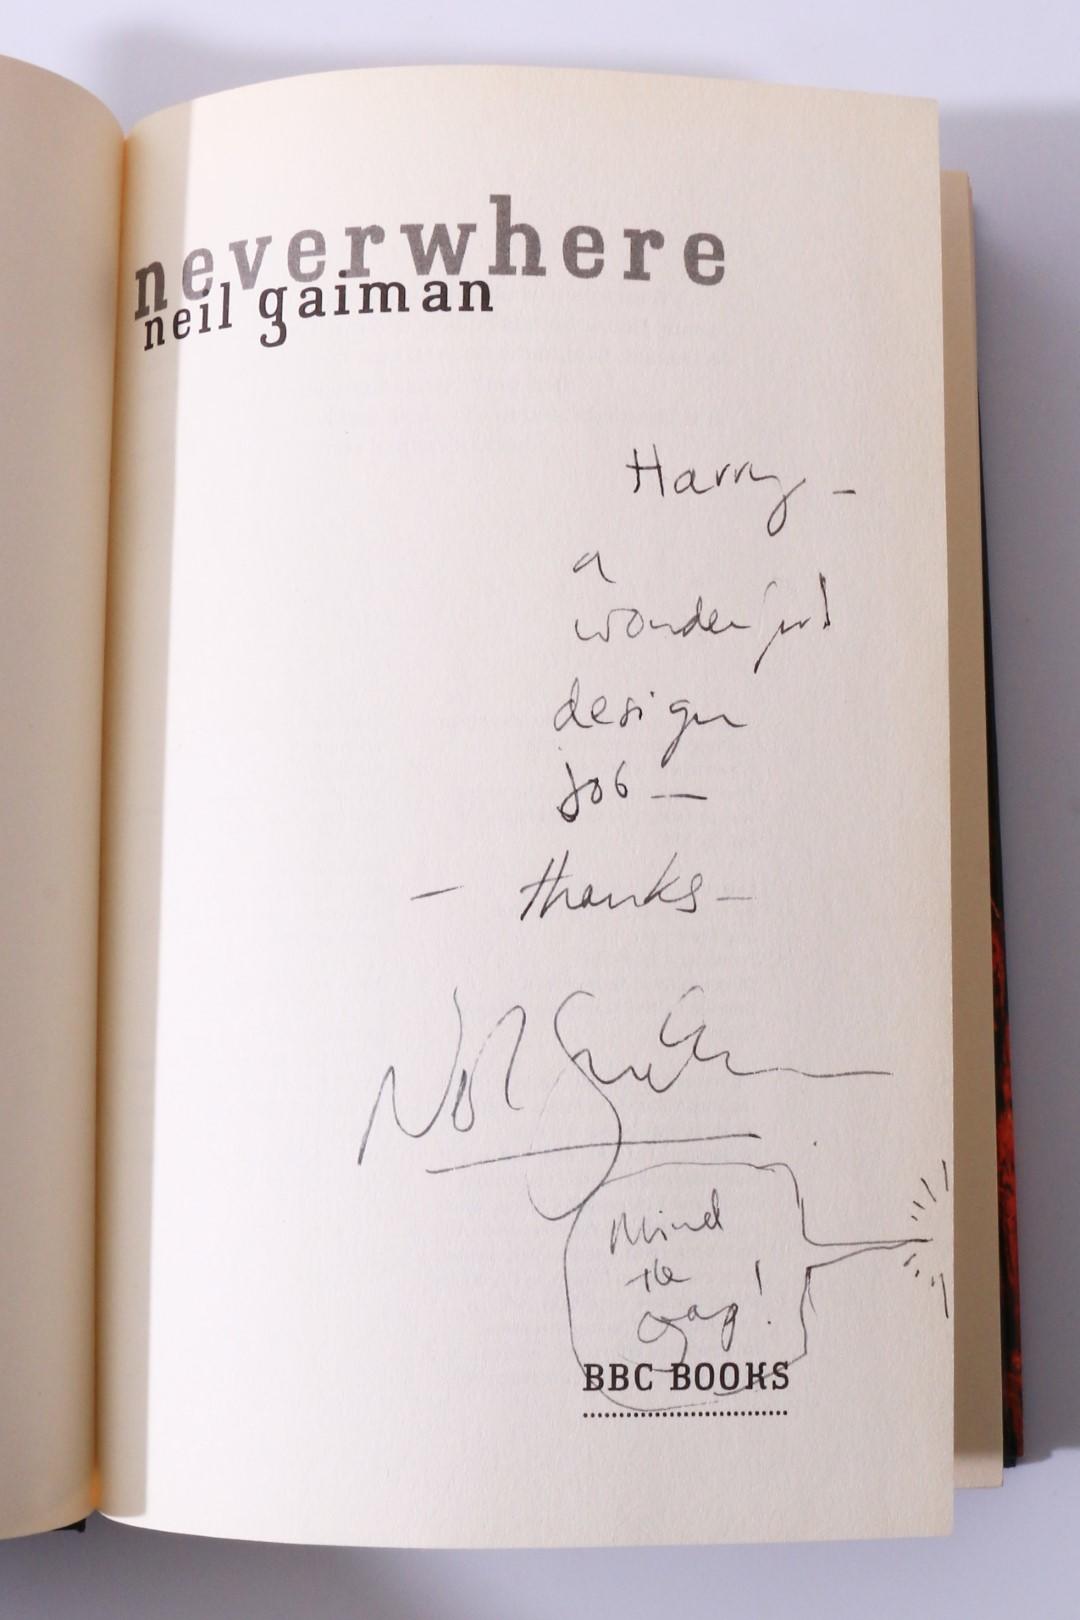 Neil Gaiman - Neverwhere - BBC, 1996, Signed Limited Edition.